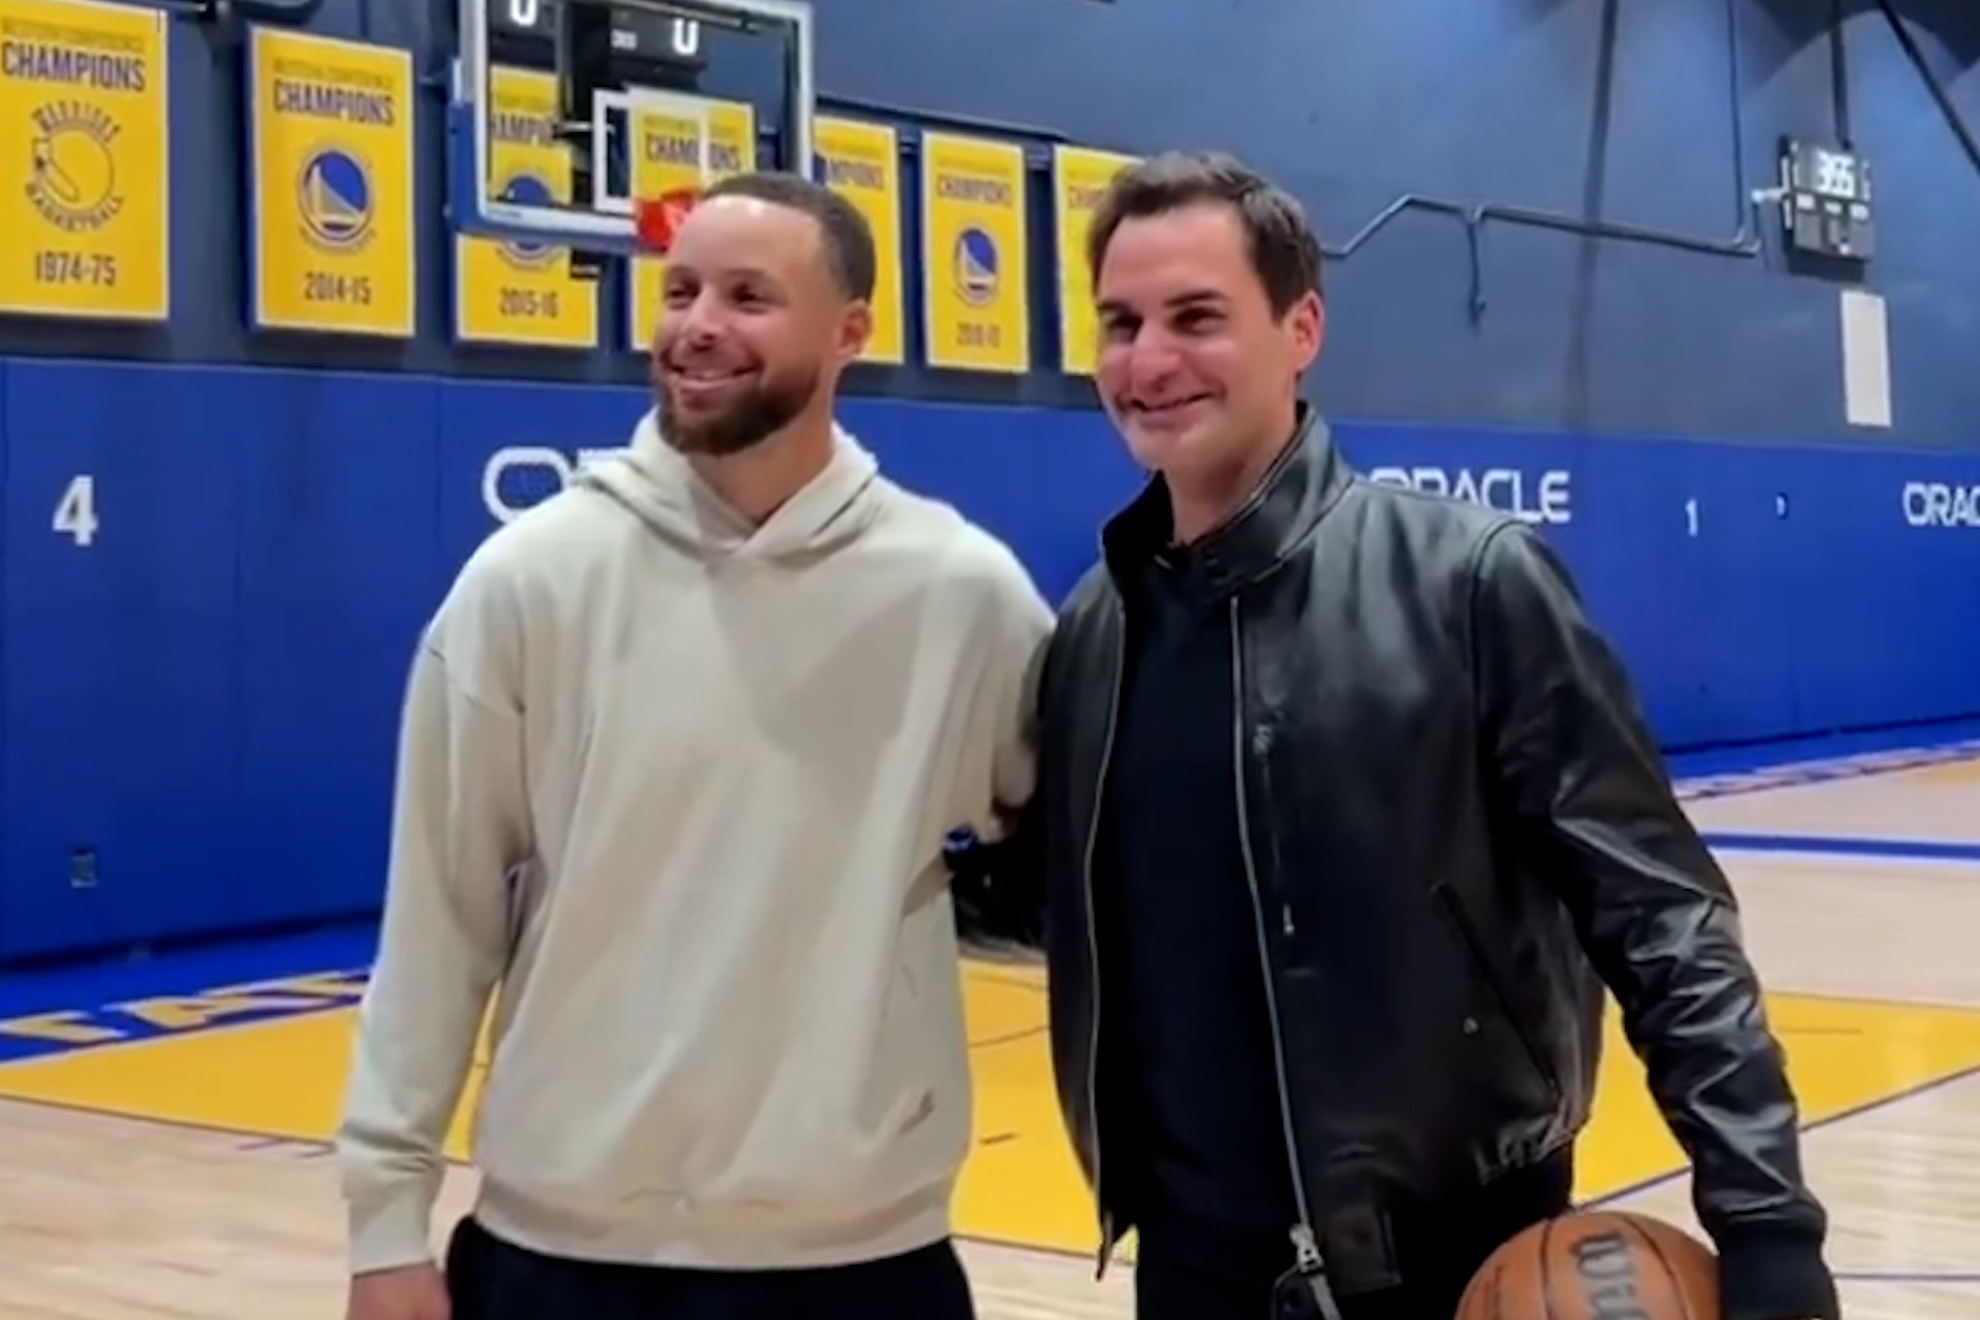 Stephen Curry and Roger Federer